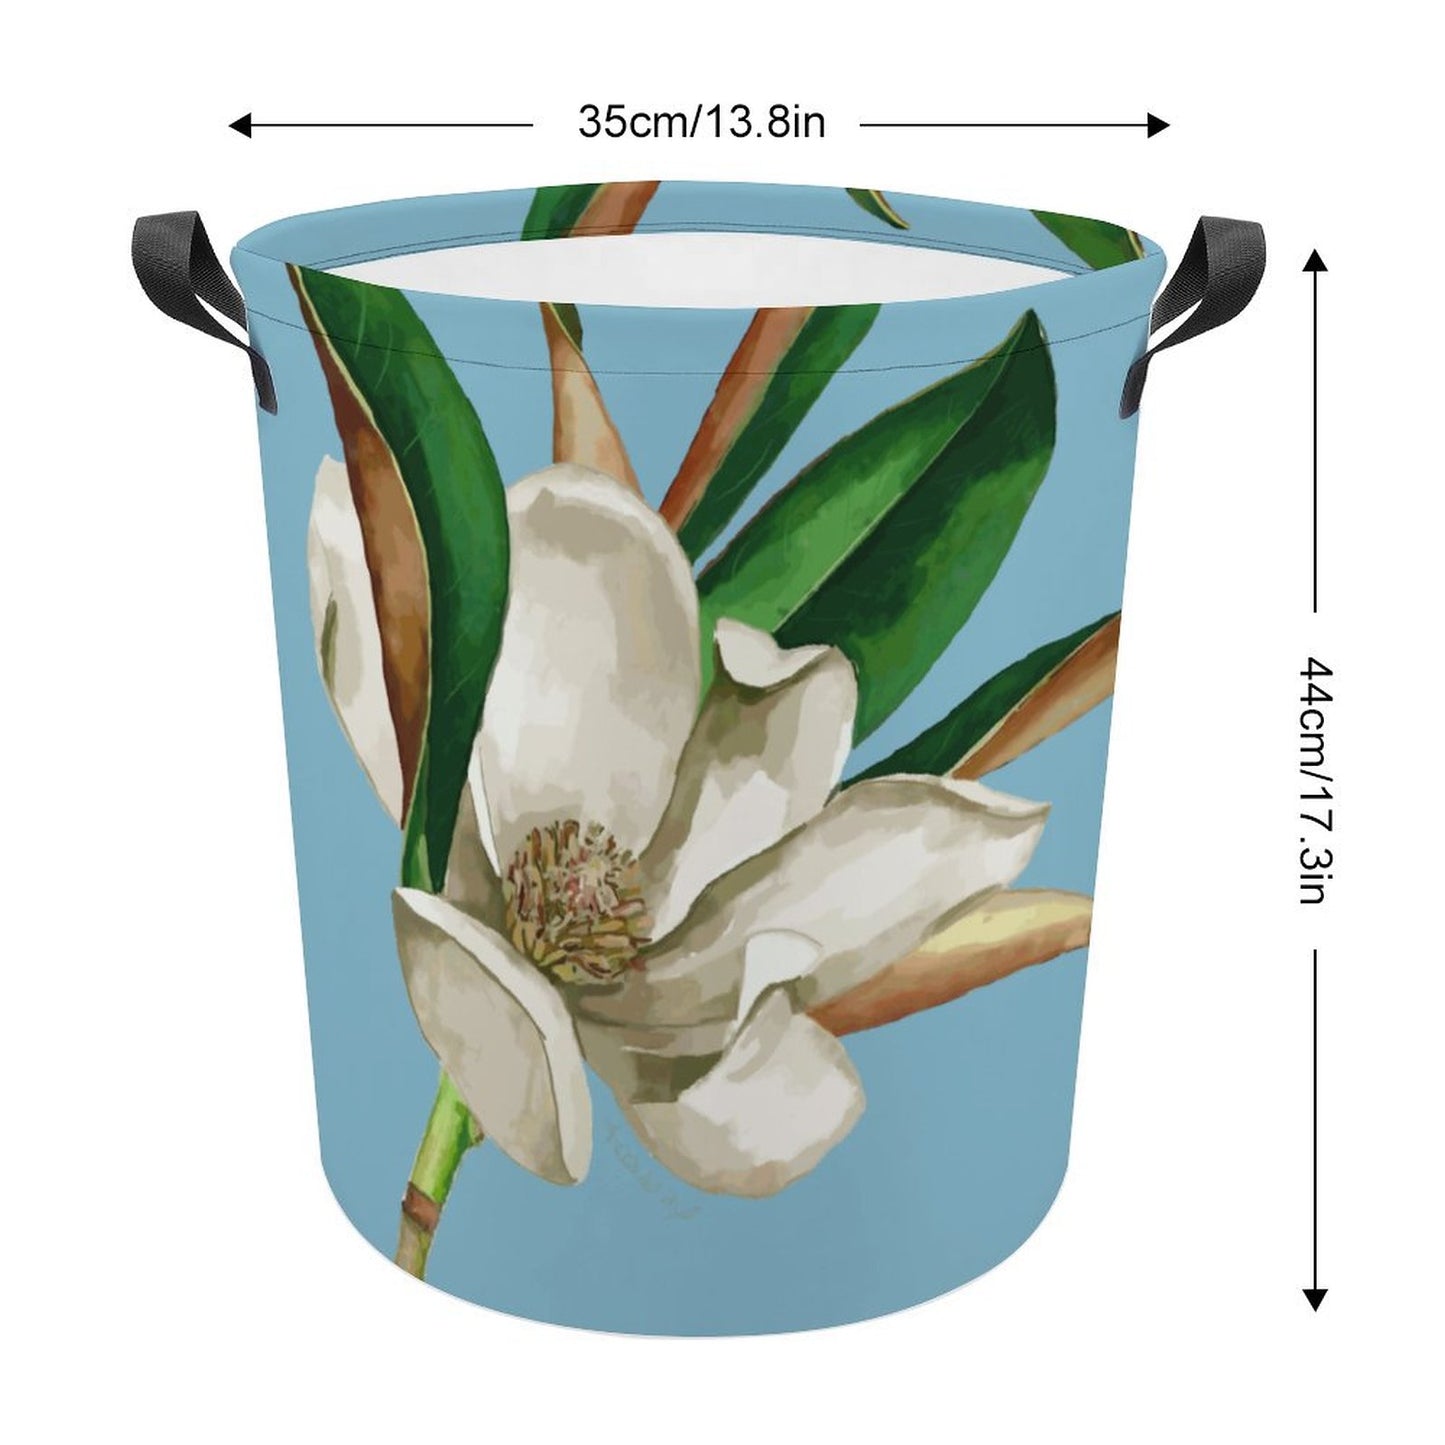 Magnolia Collapsible Laundry Basket